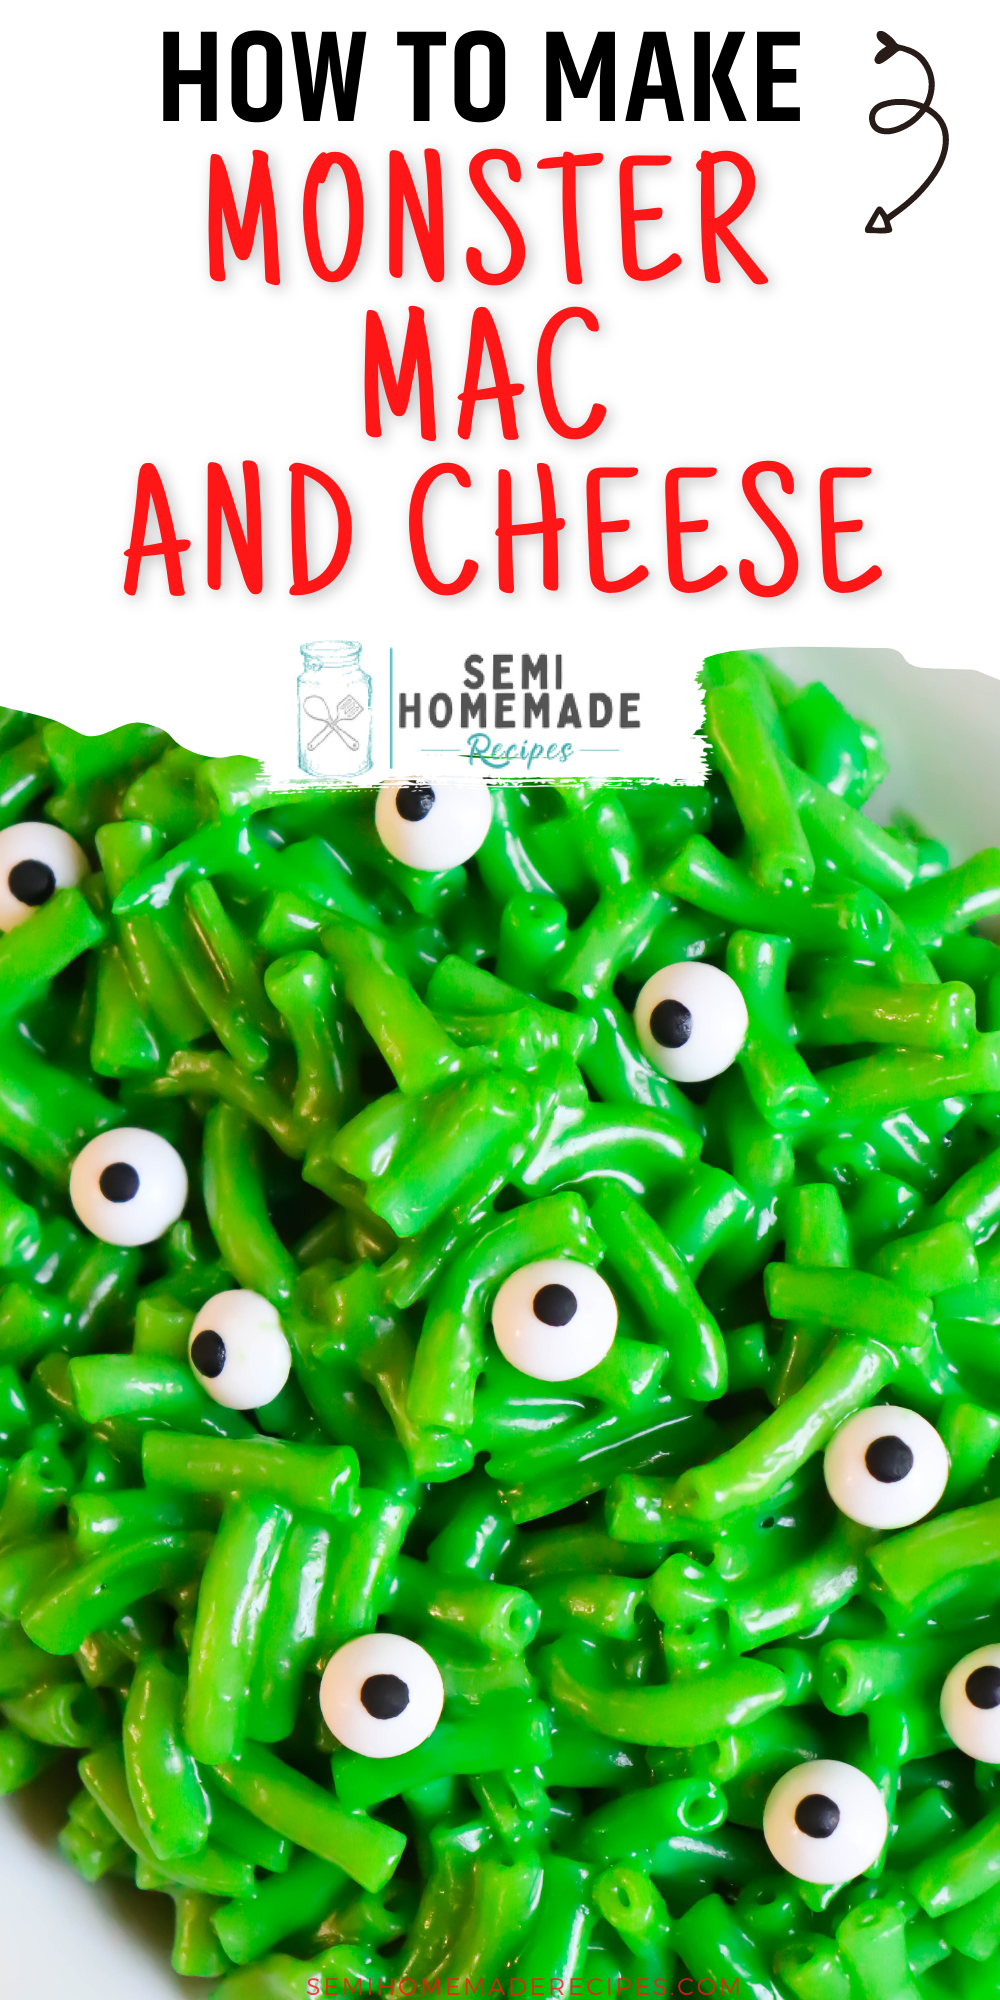 Monster Mac and Cheese - a semi homemade, fun and savory Halloween recipe using macaroni and cheese, green food coloring and candy eyes! This Monster Mac and cheese is the perfect Halloween lunch or Halloween dinner!